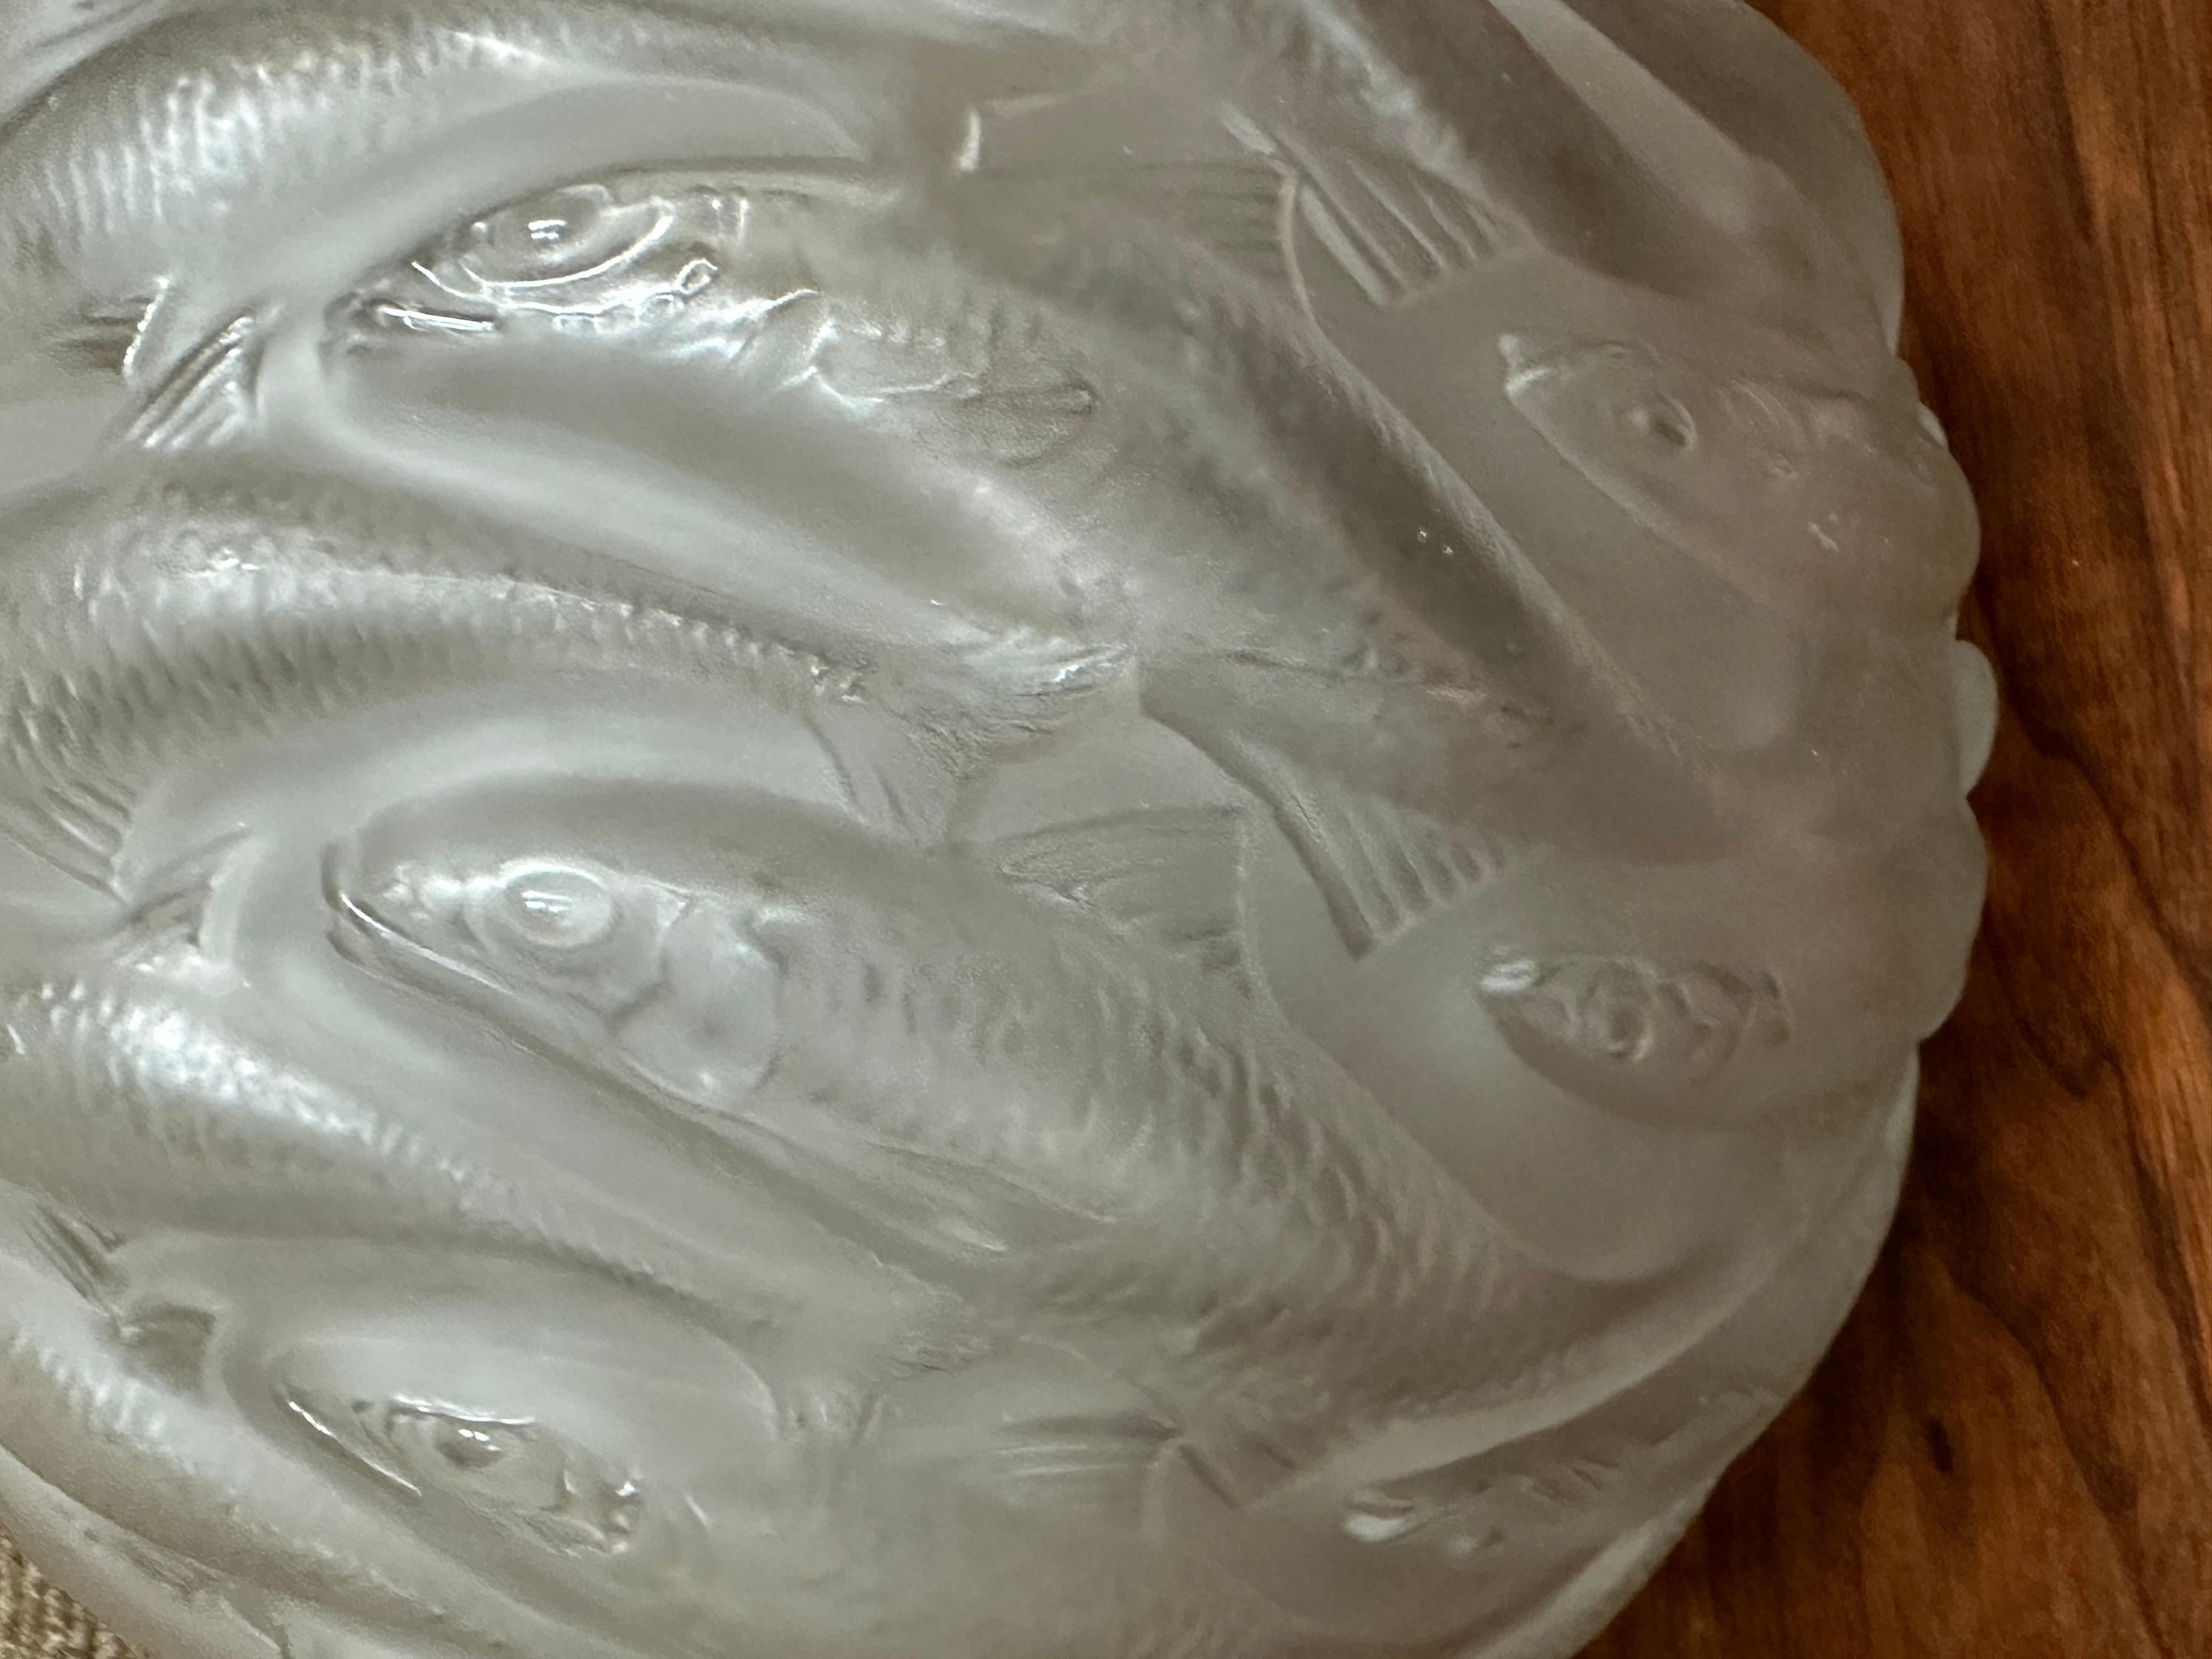 René Lalique (1860-1945)
Marisa Vase 1927
Smoky Glass
The sizes are 9 x 9 in

Literature:
Robert Prescott-Walker. Collecting Lalique Glass. Illustrated on page 45.

René Lalique was a seminal French glass designer known for his Art Nouveau and Art